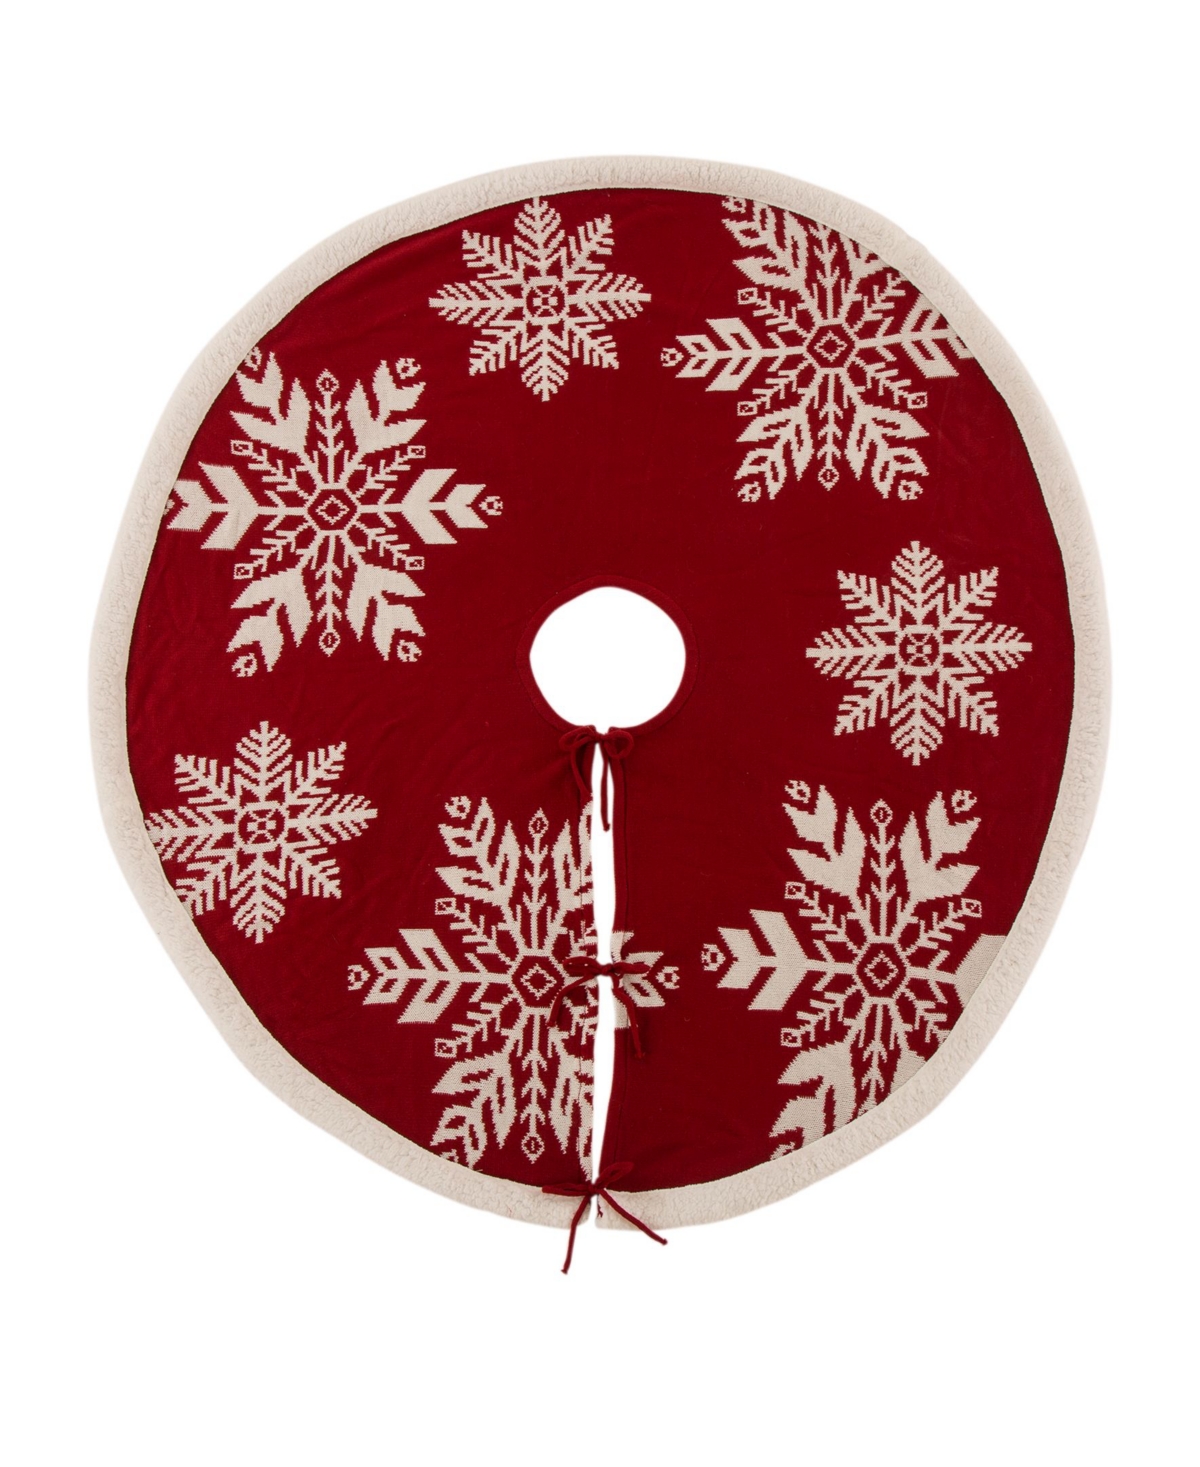 48"D Knitted Snowflake Acrylic Christmas Tree Skirt - Red